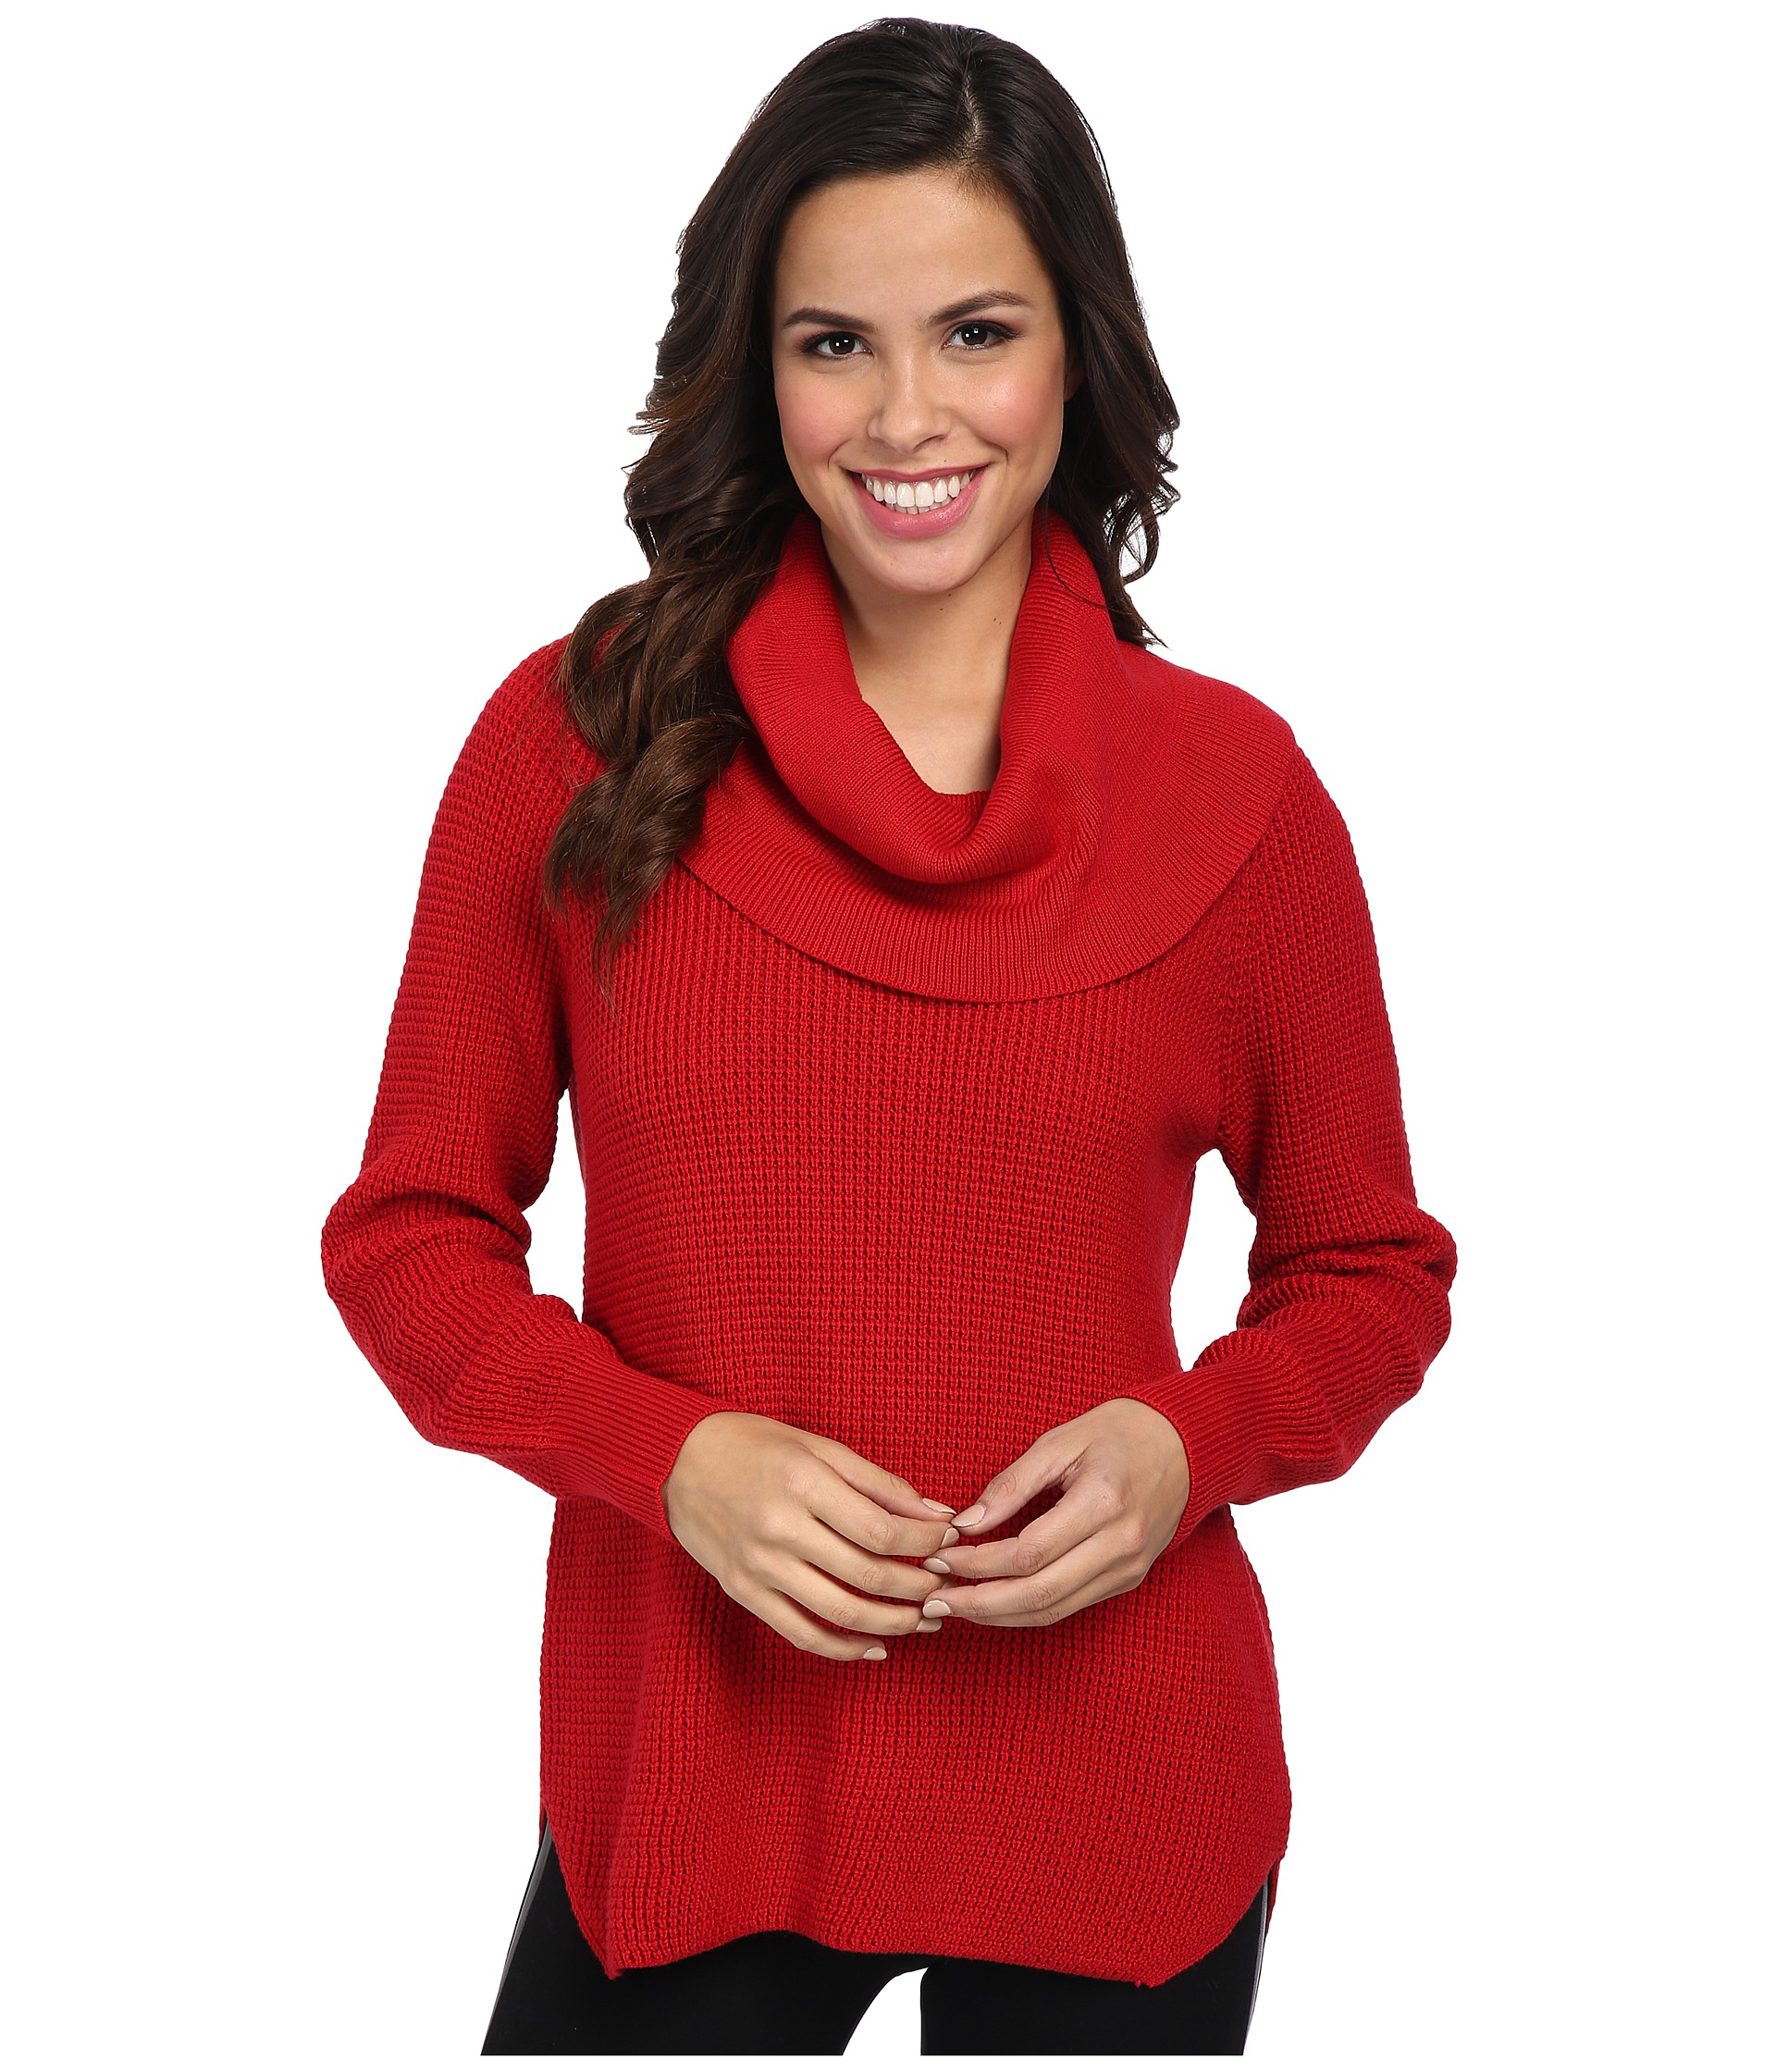 Lyst - Michael Michael Kors Cowl Neck Sweater in Red